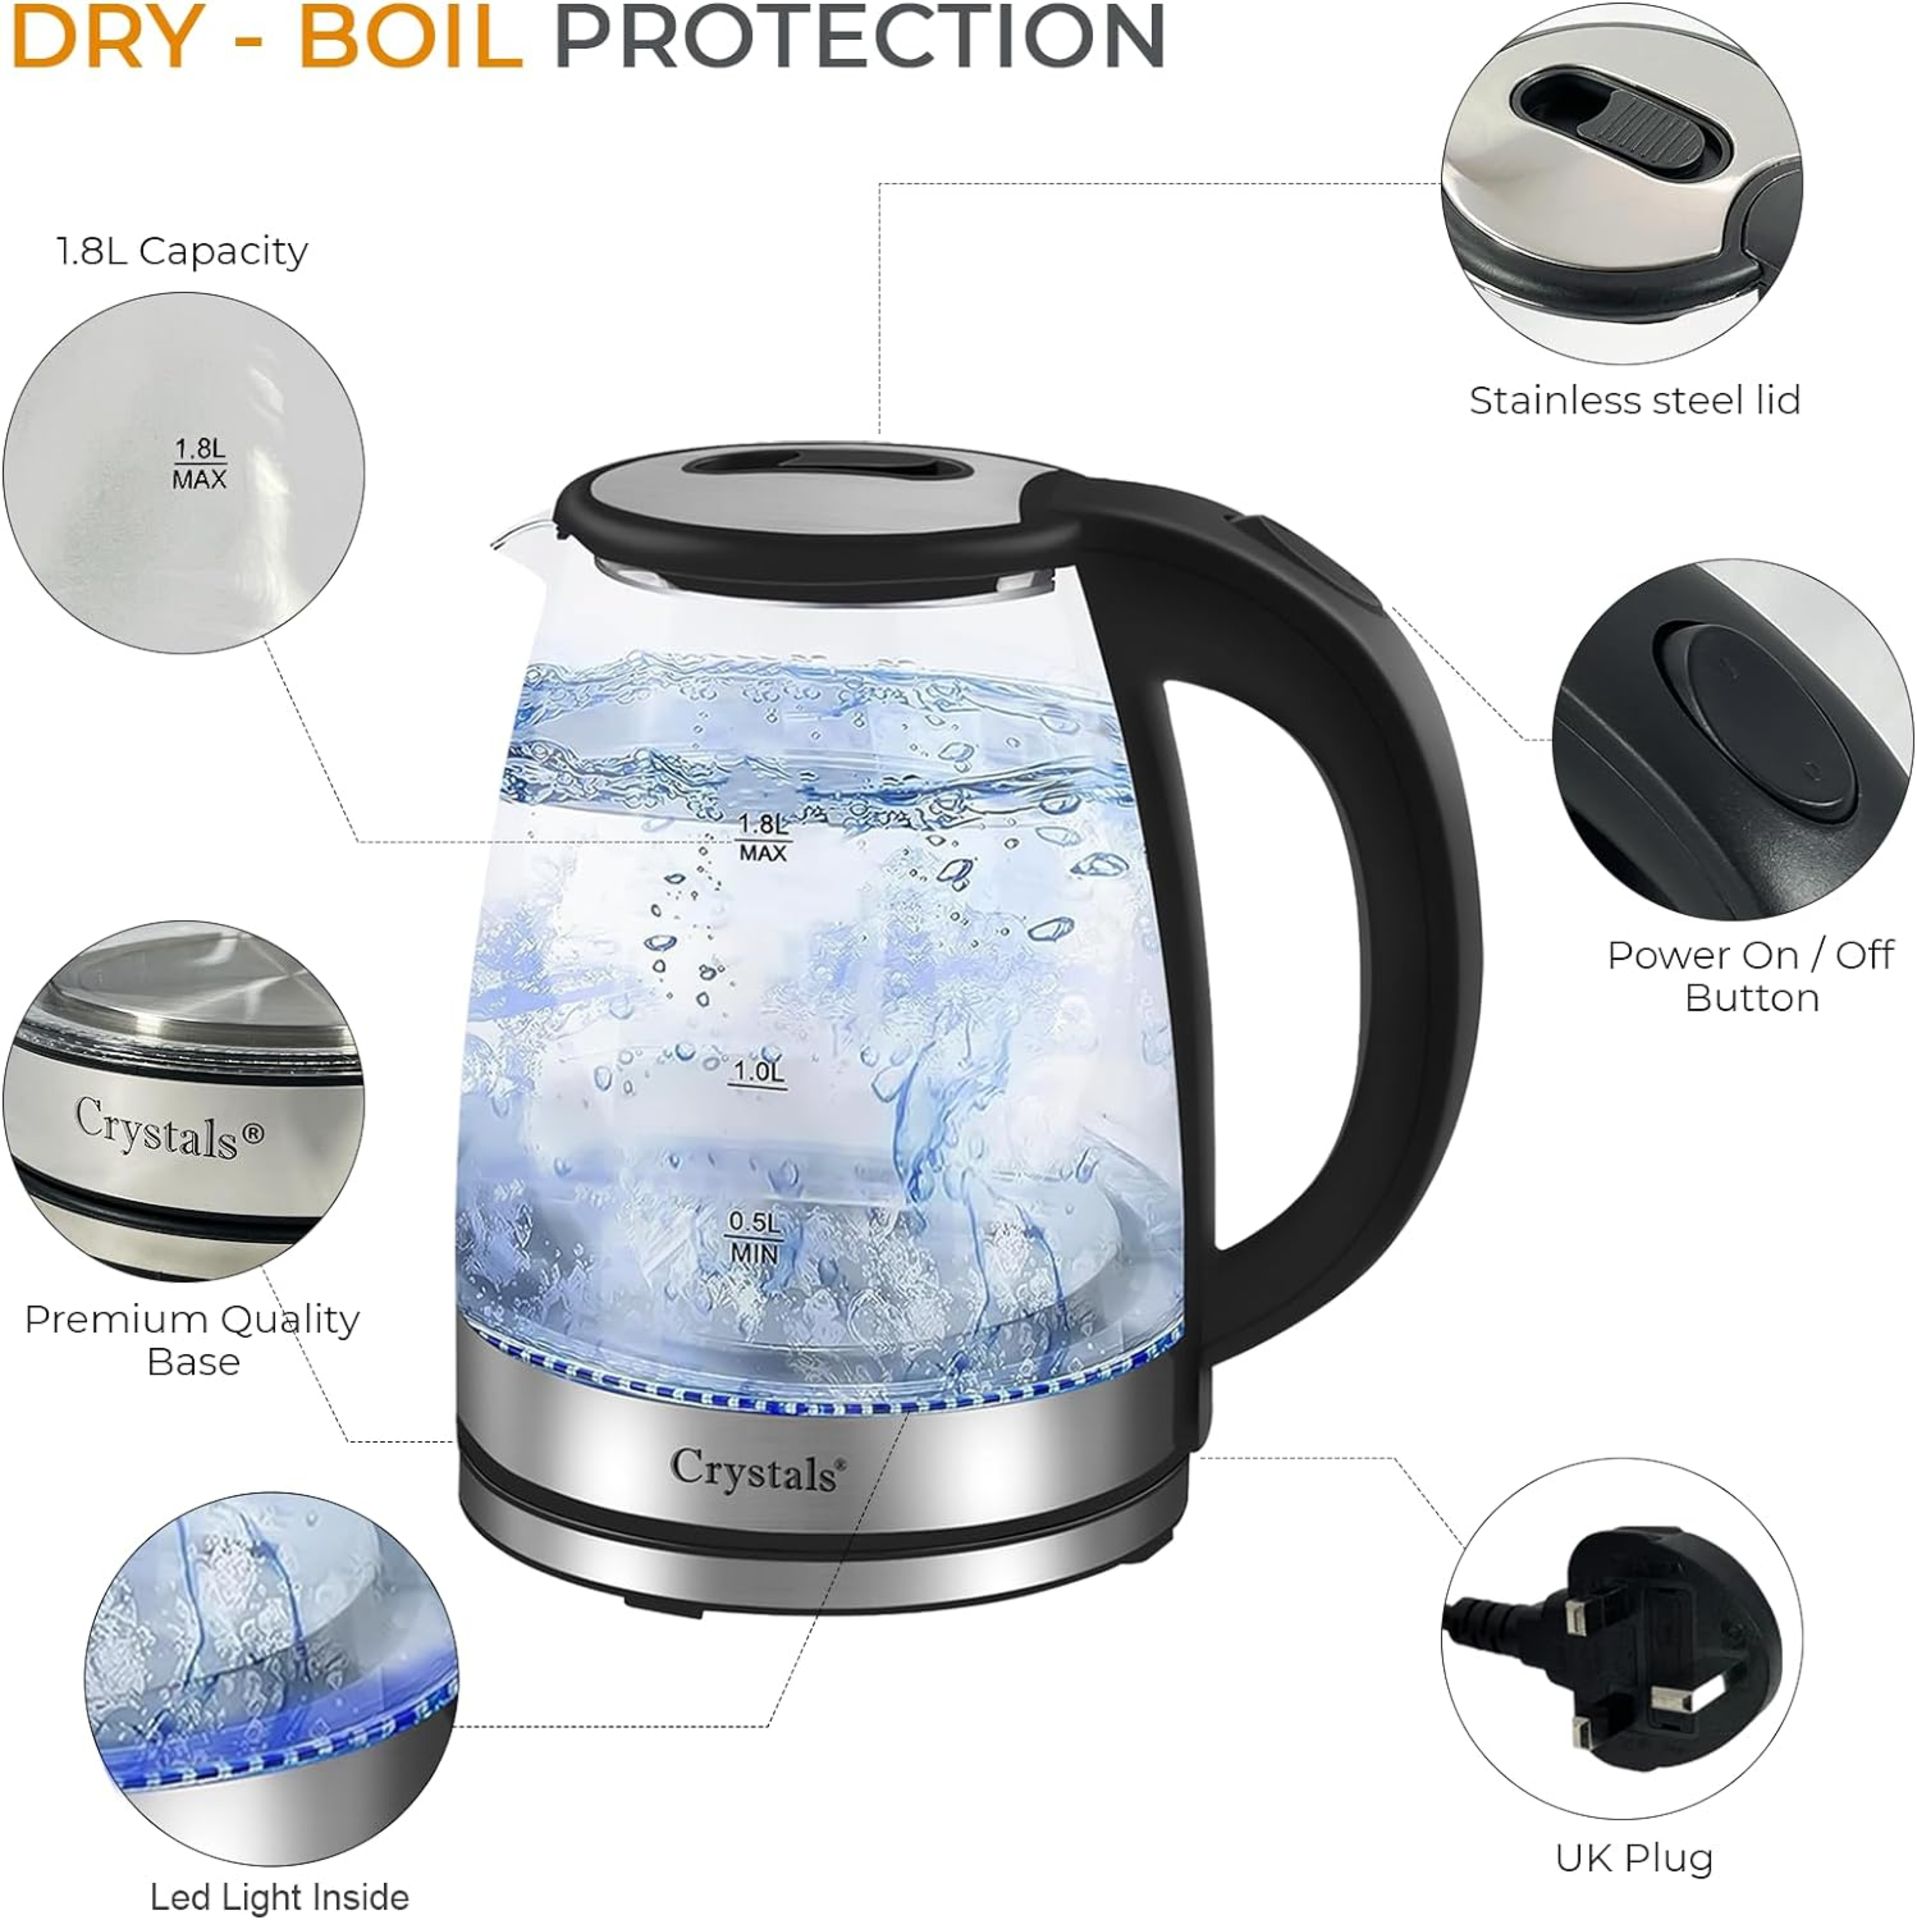 Crystals 1.8L/1500W Glass Electric Kettles, Glass Kettle With Blue LED and Boil Dry Protection, C...